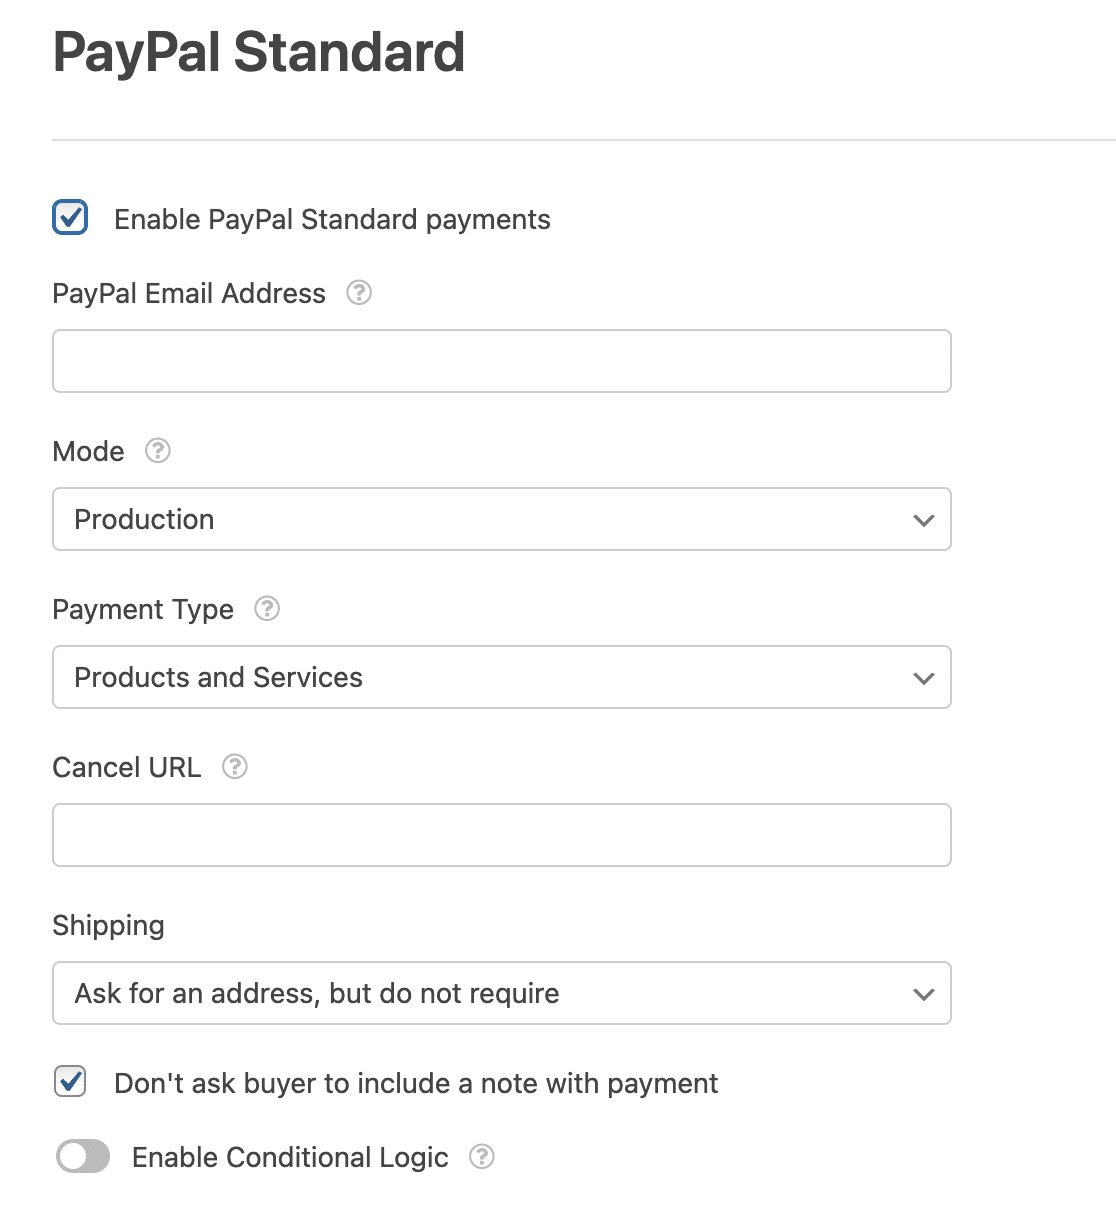 The PayPal Standard form connection settings